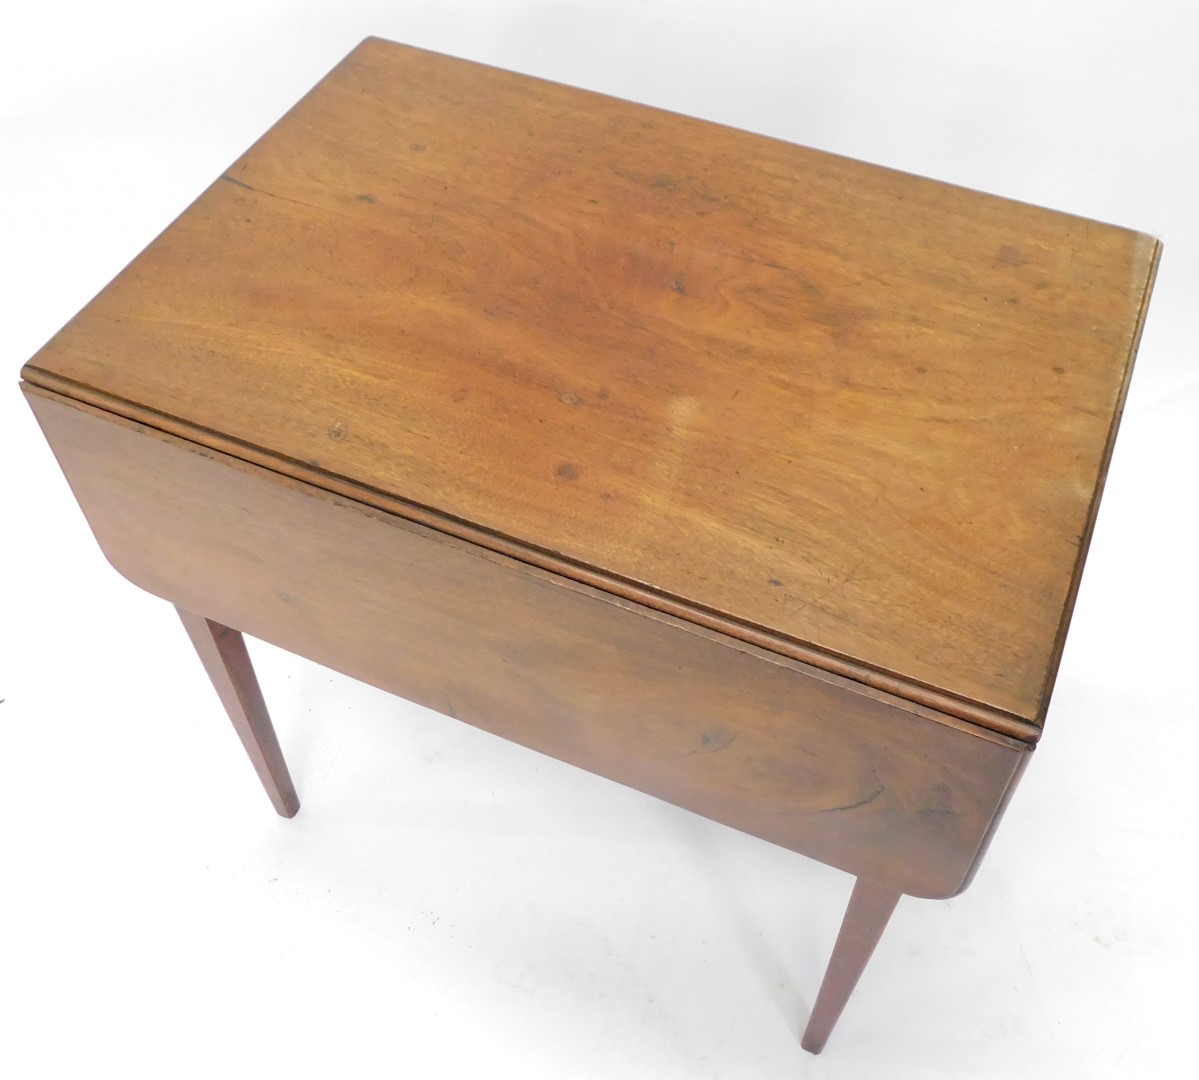 An early 19thC mahogany Pembroke table, the rectangular top with rounded corners and a moulded edge, - Image 2 of 2